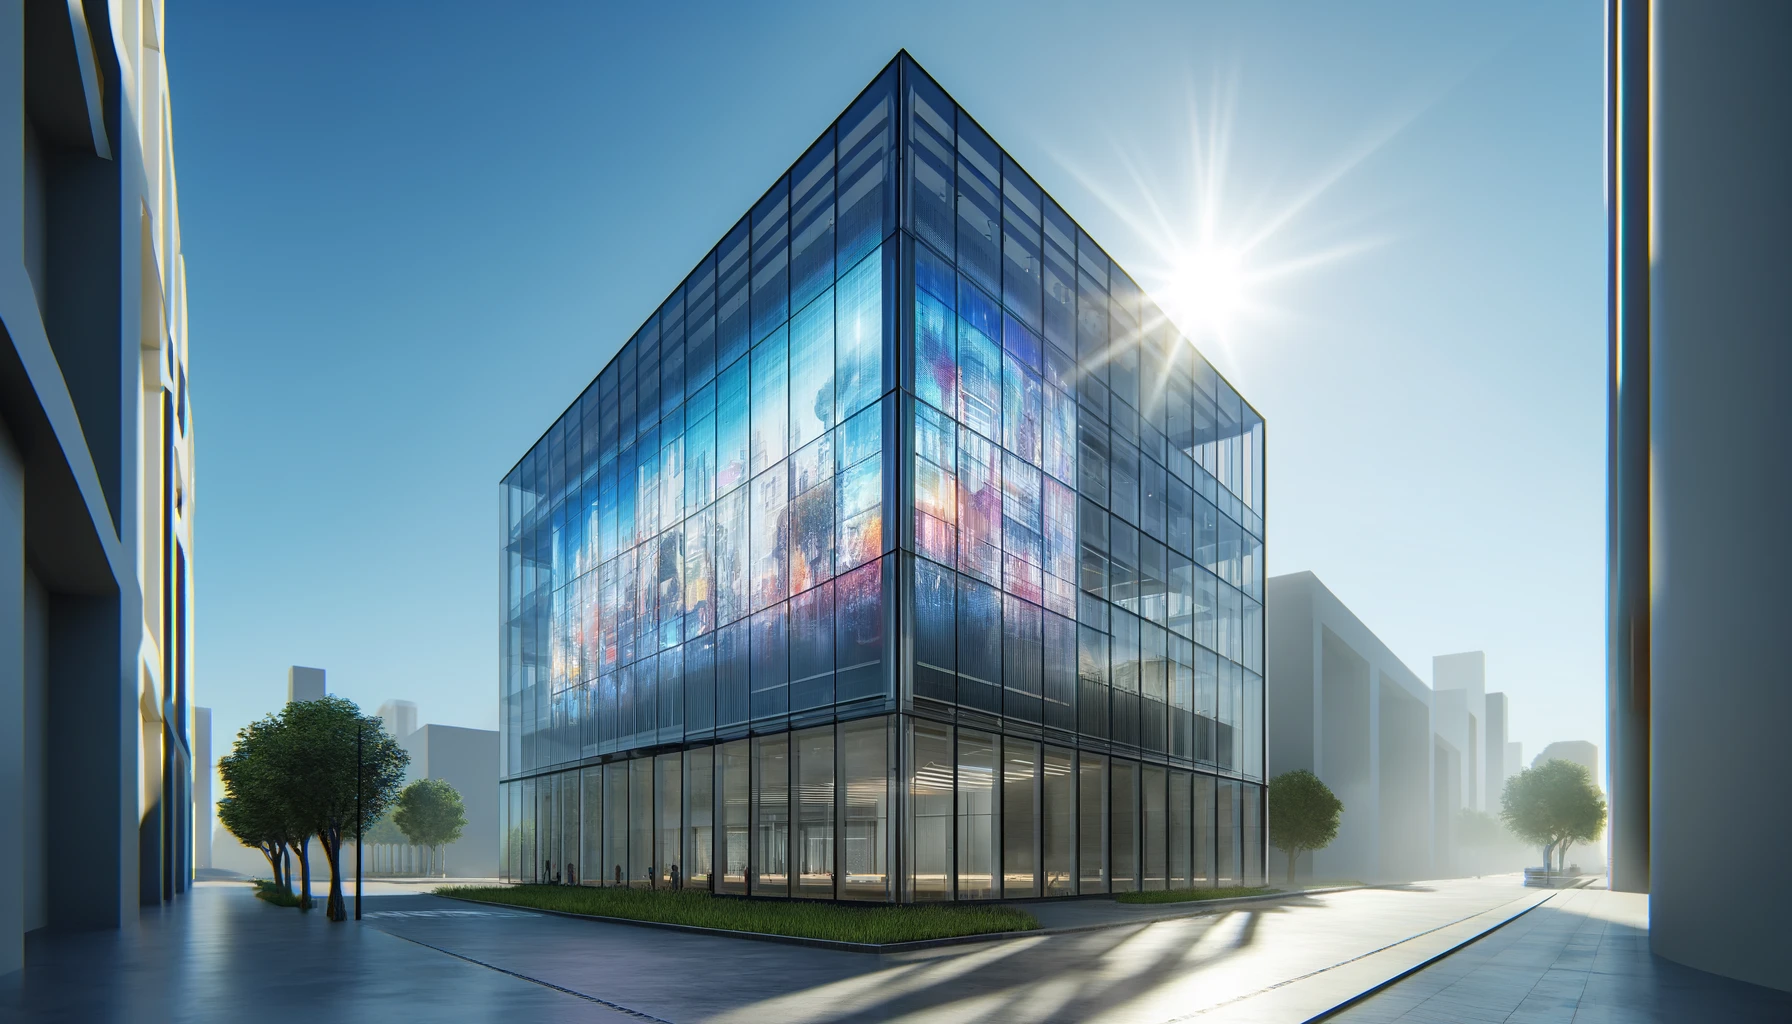 transparent LED display facade. The building has a sleek, contemporary design with a large, visible LED screen